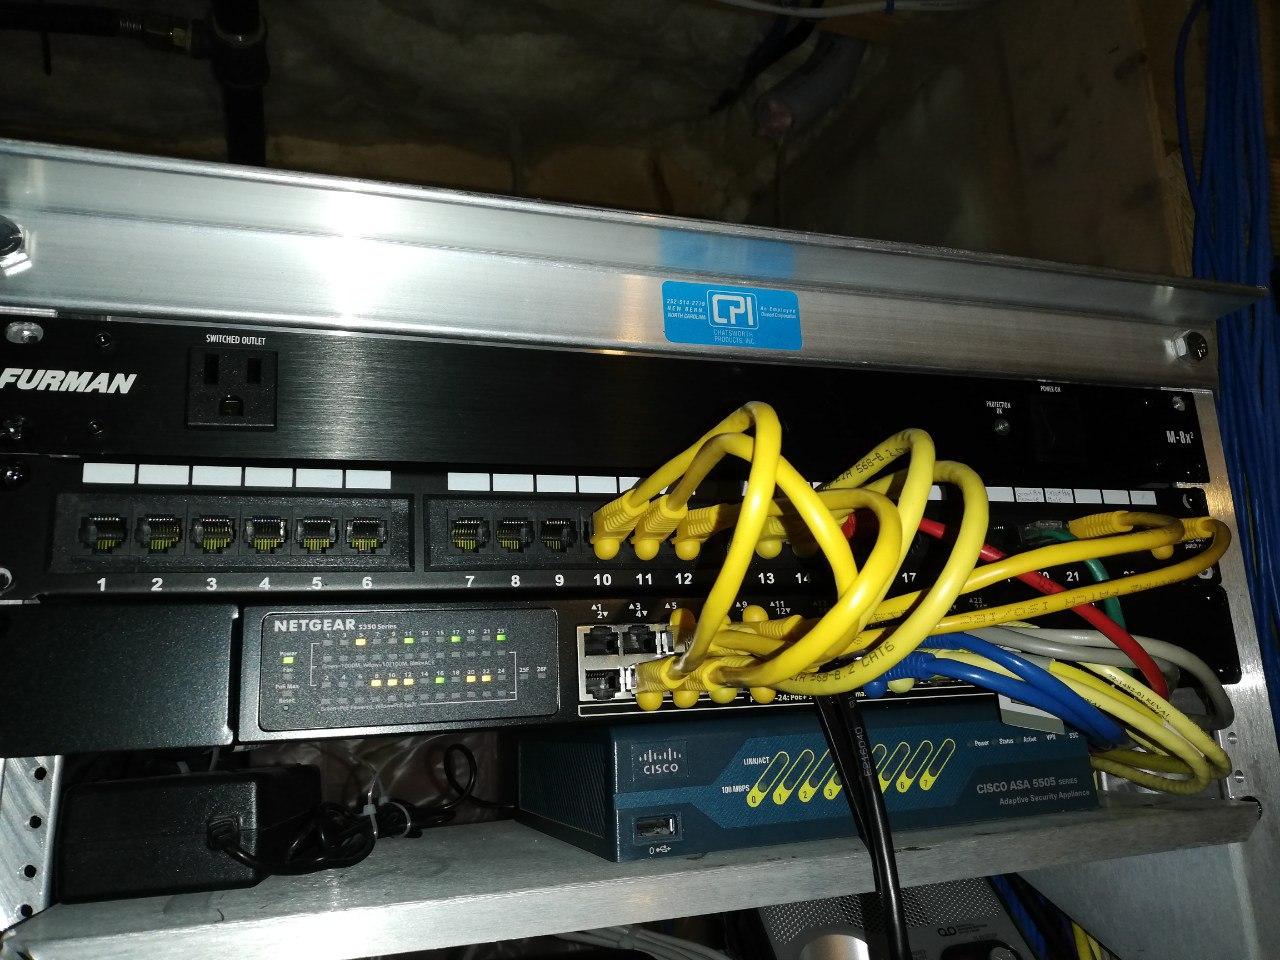 Network switch and Home patch panel.